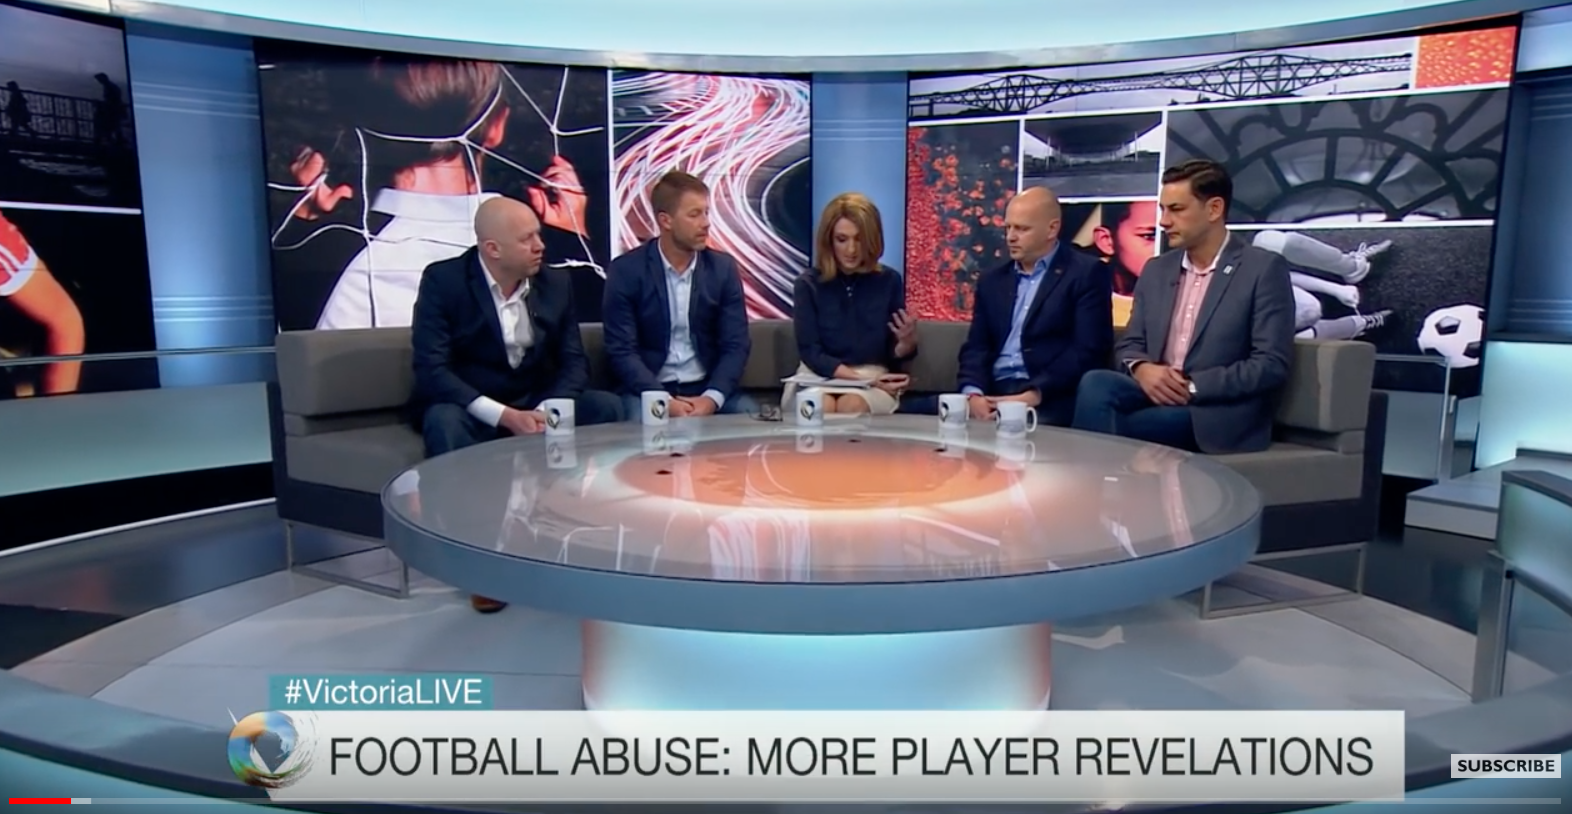 [European Union] Footballers speak out over sexual abuse - BBC News